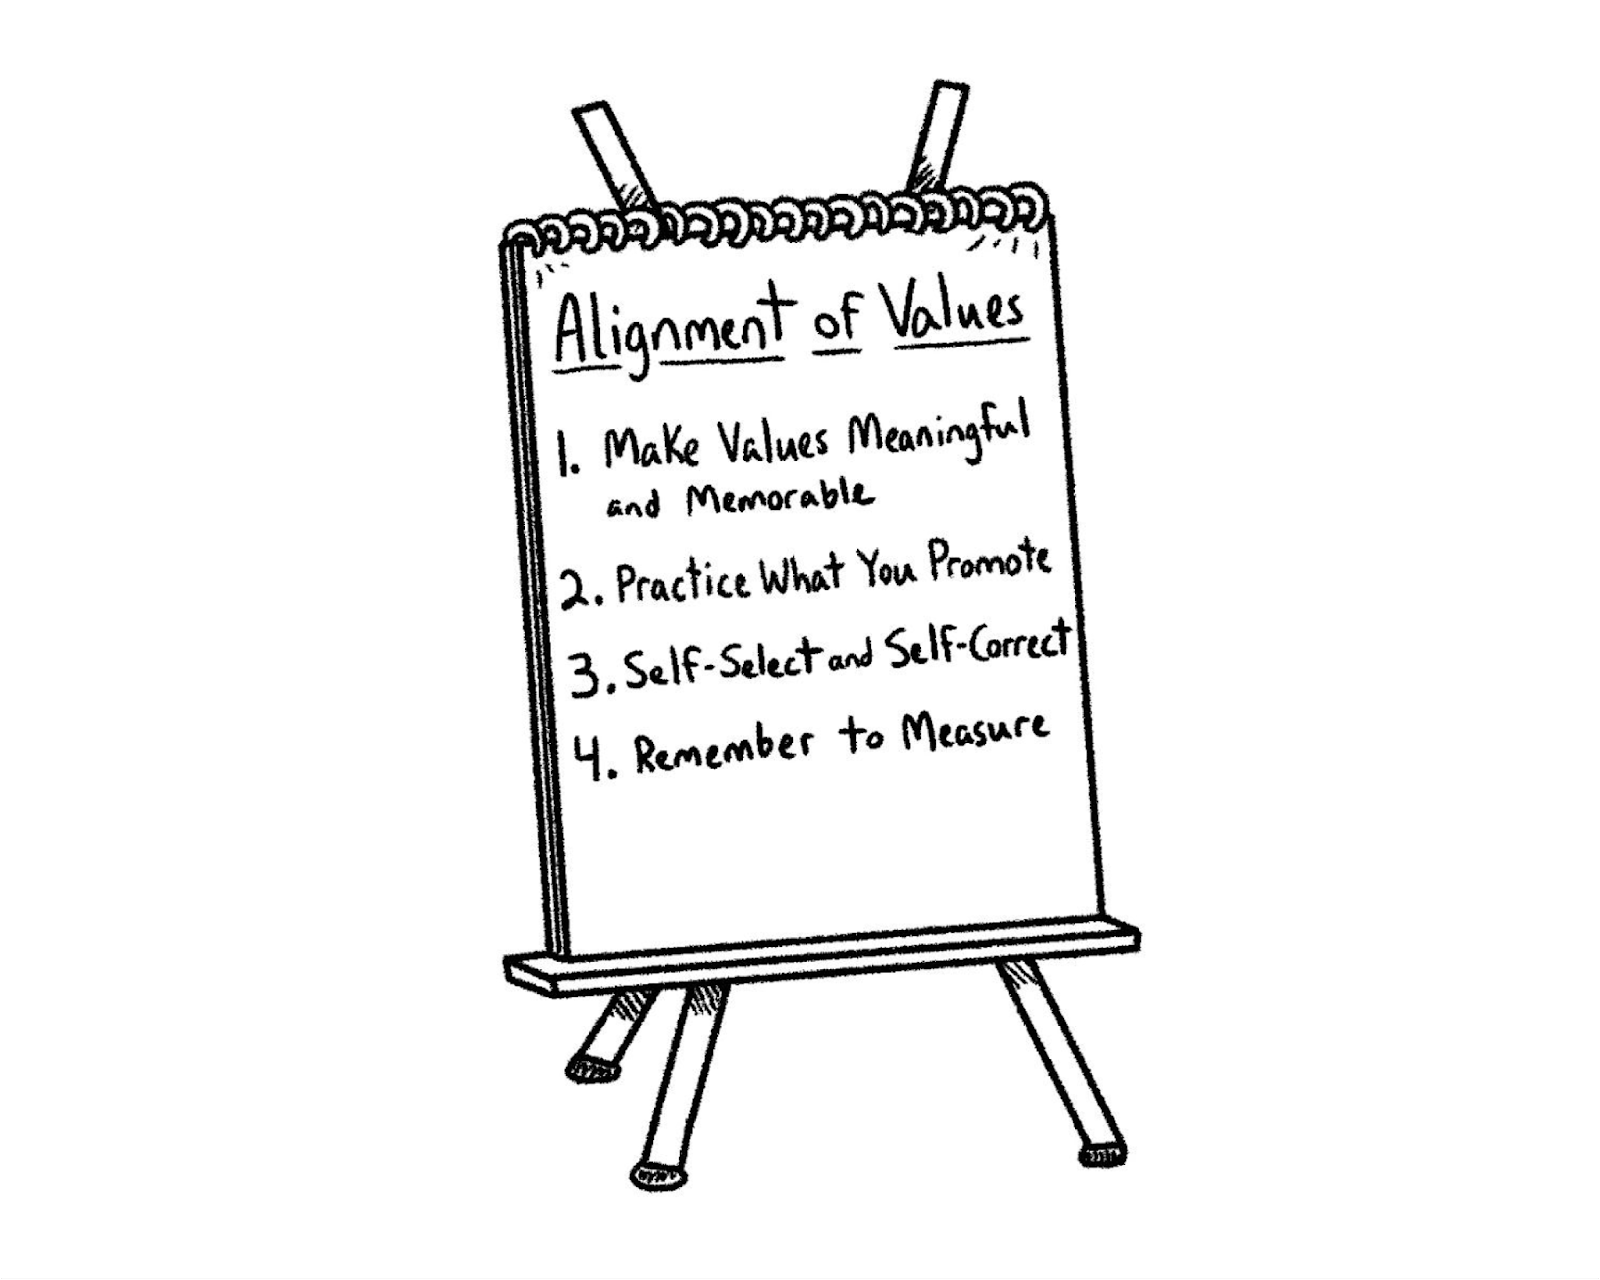 
1 - make values meaningful & memorable
2 - practice what you promote
3 - self-select and self-correct
4 - remember to measure